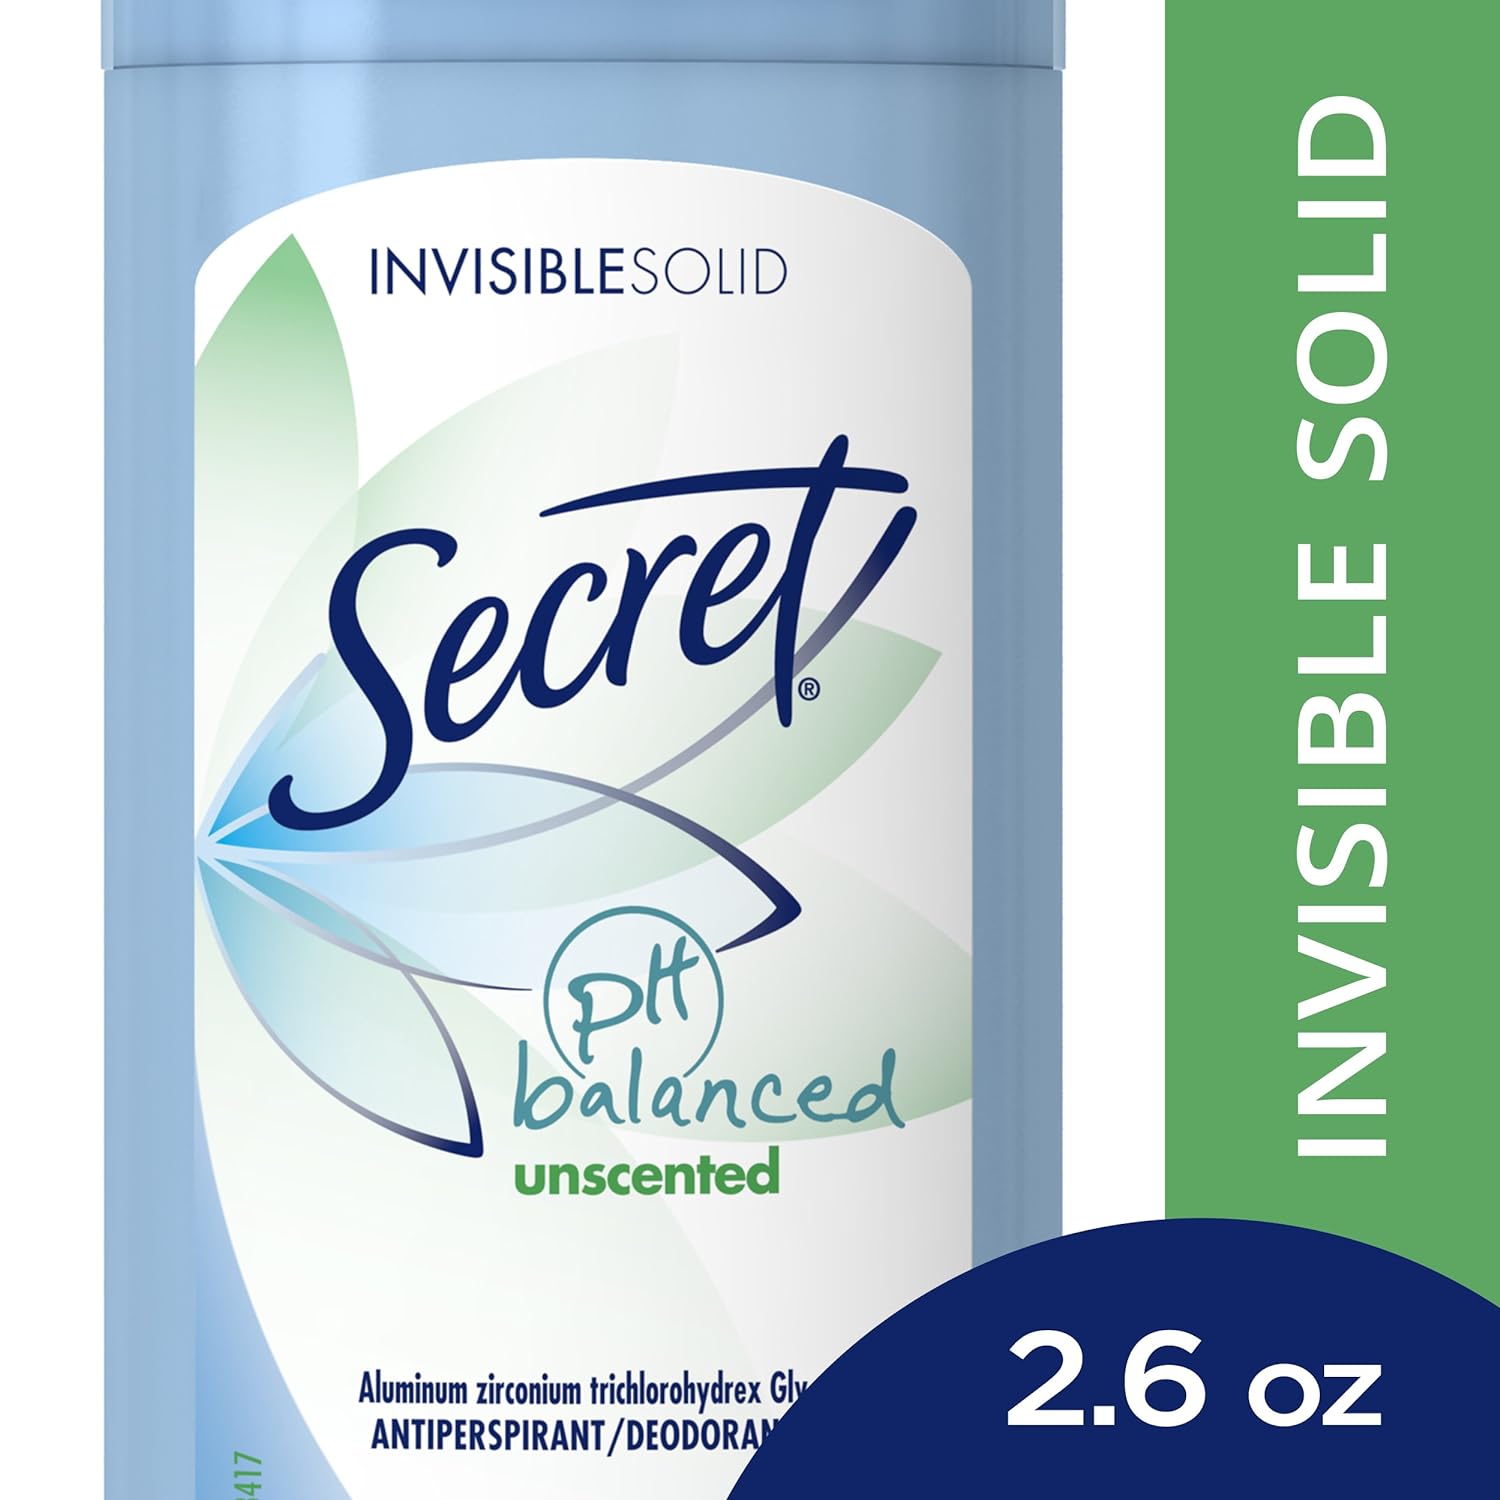  Secret Antiperspirant and Deodorant for Women, Original Unscented, Invisible Solid, pH Balanced, 2.6 Oz (Pack of 6)